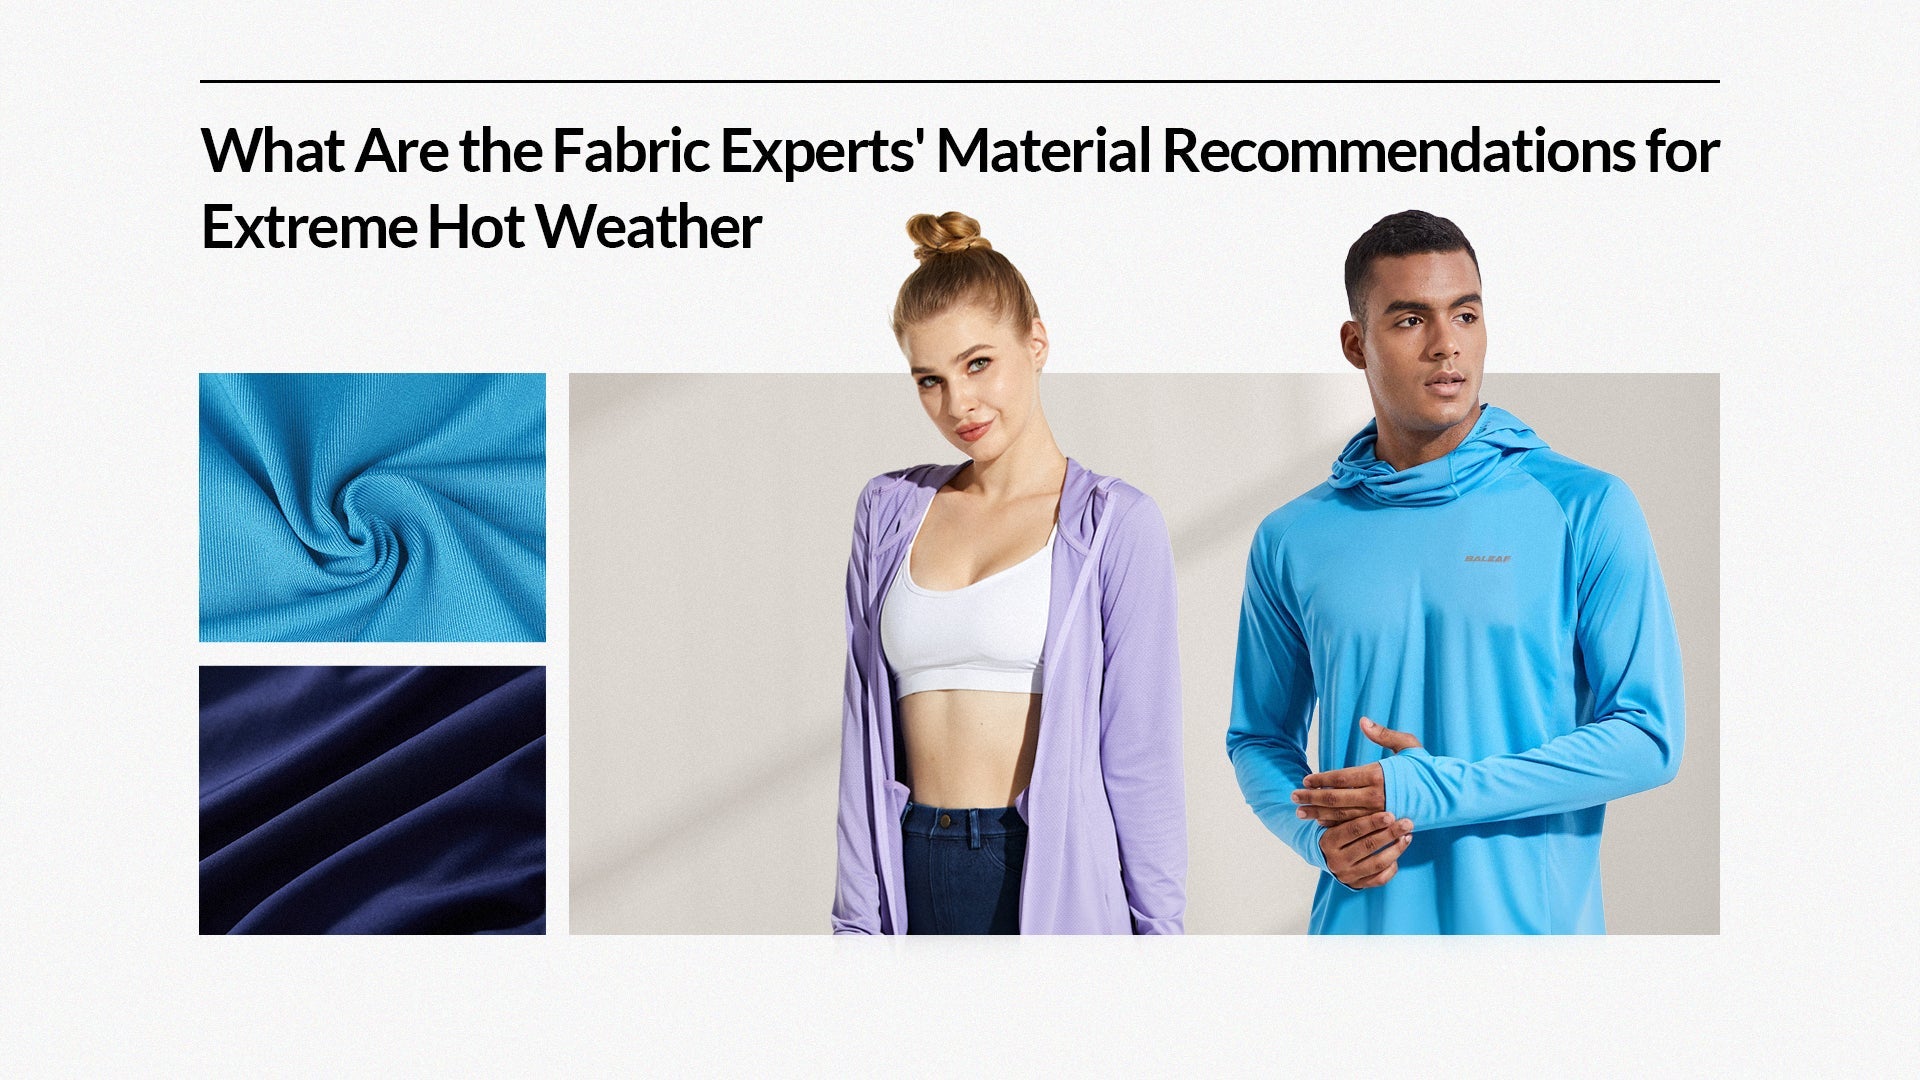 What Are the Fabric Experts' Material Recommendations for Extreme Hot Weather